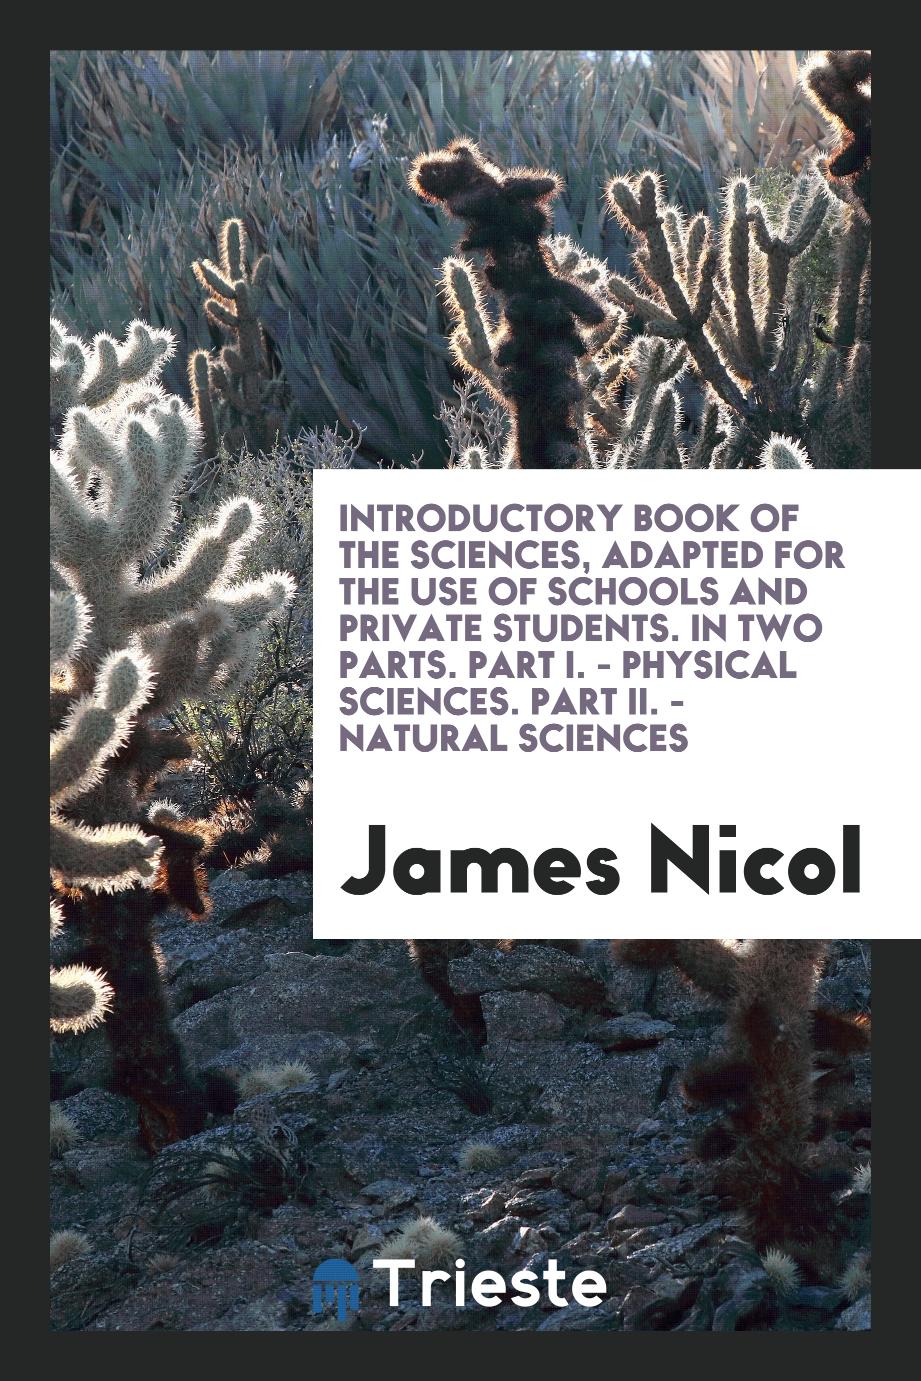 Introductory Book of the Sciences, Adapted for the Use of Schools and Private Students. In Two Parts. Part I. - Physical Sciences. Part II. - Natural Sciences